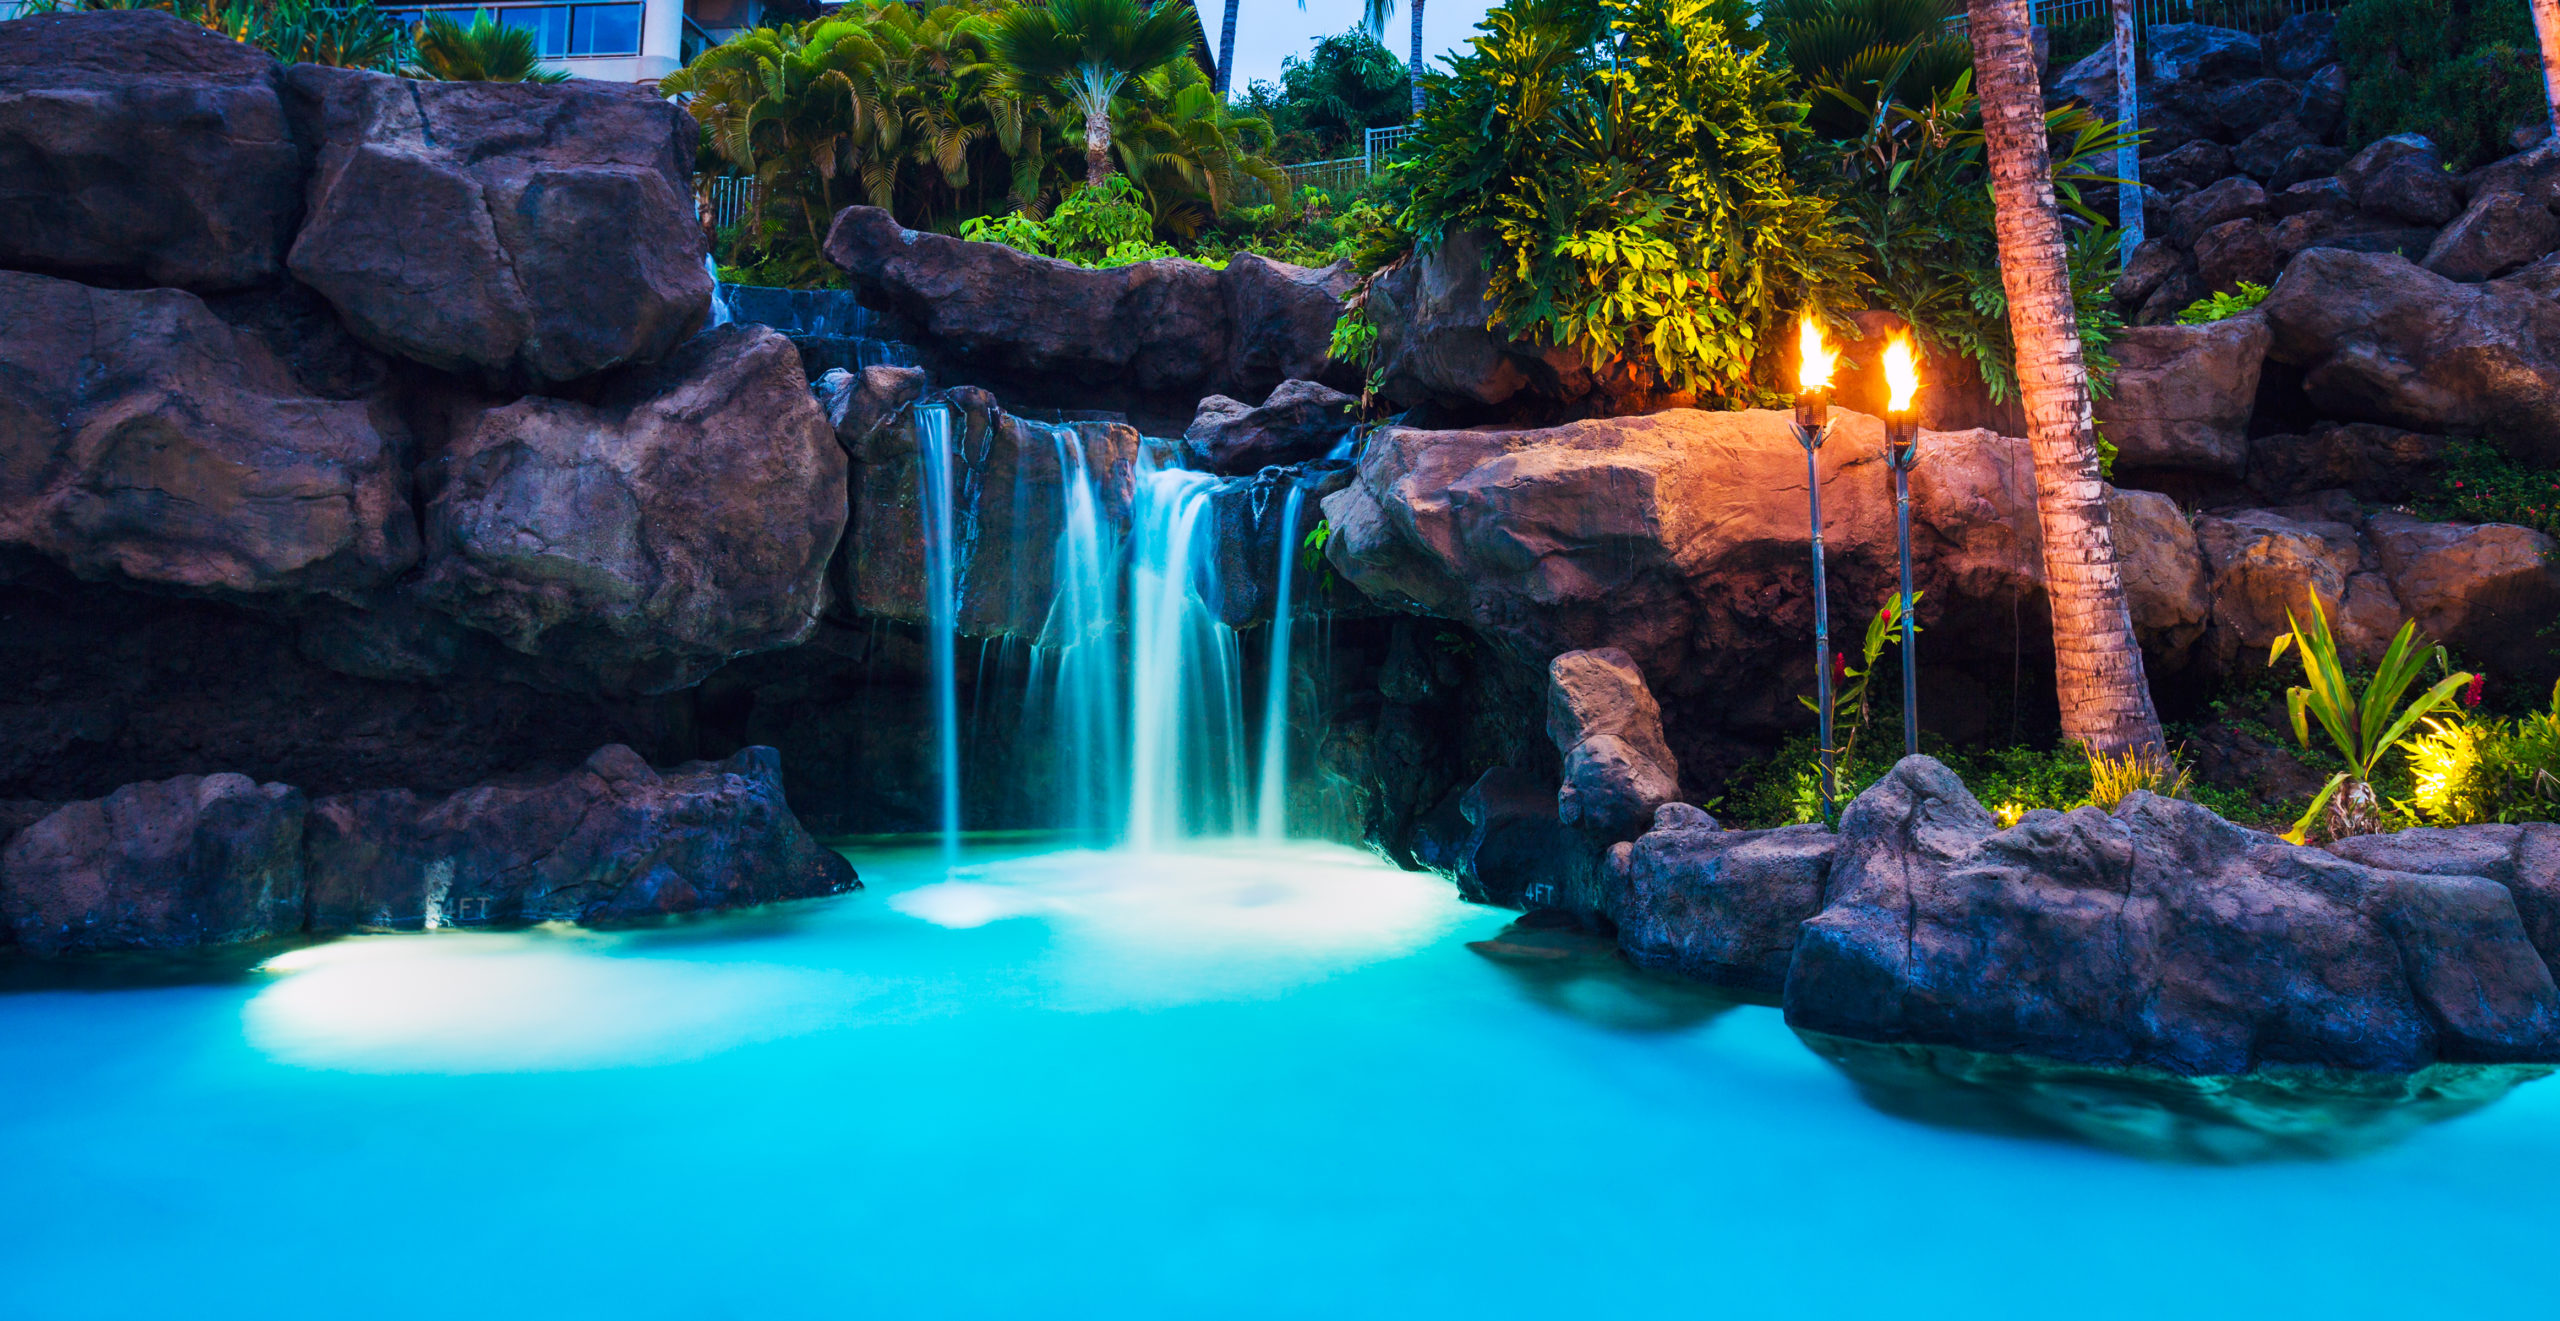 A pool with cascading waterfalls and vibrant lighting, creating a visually stunning and serene aquatic ambiance.